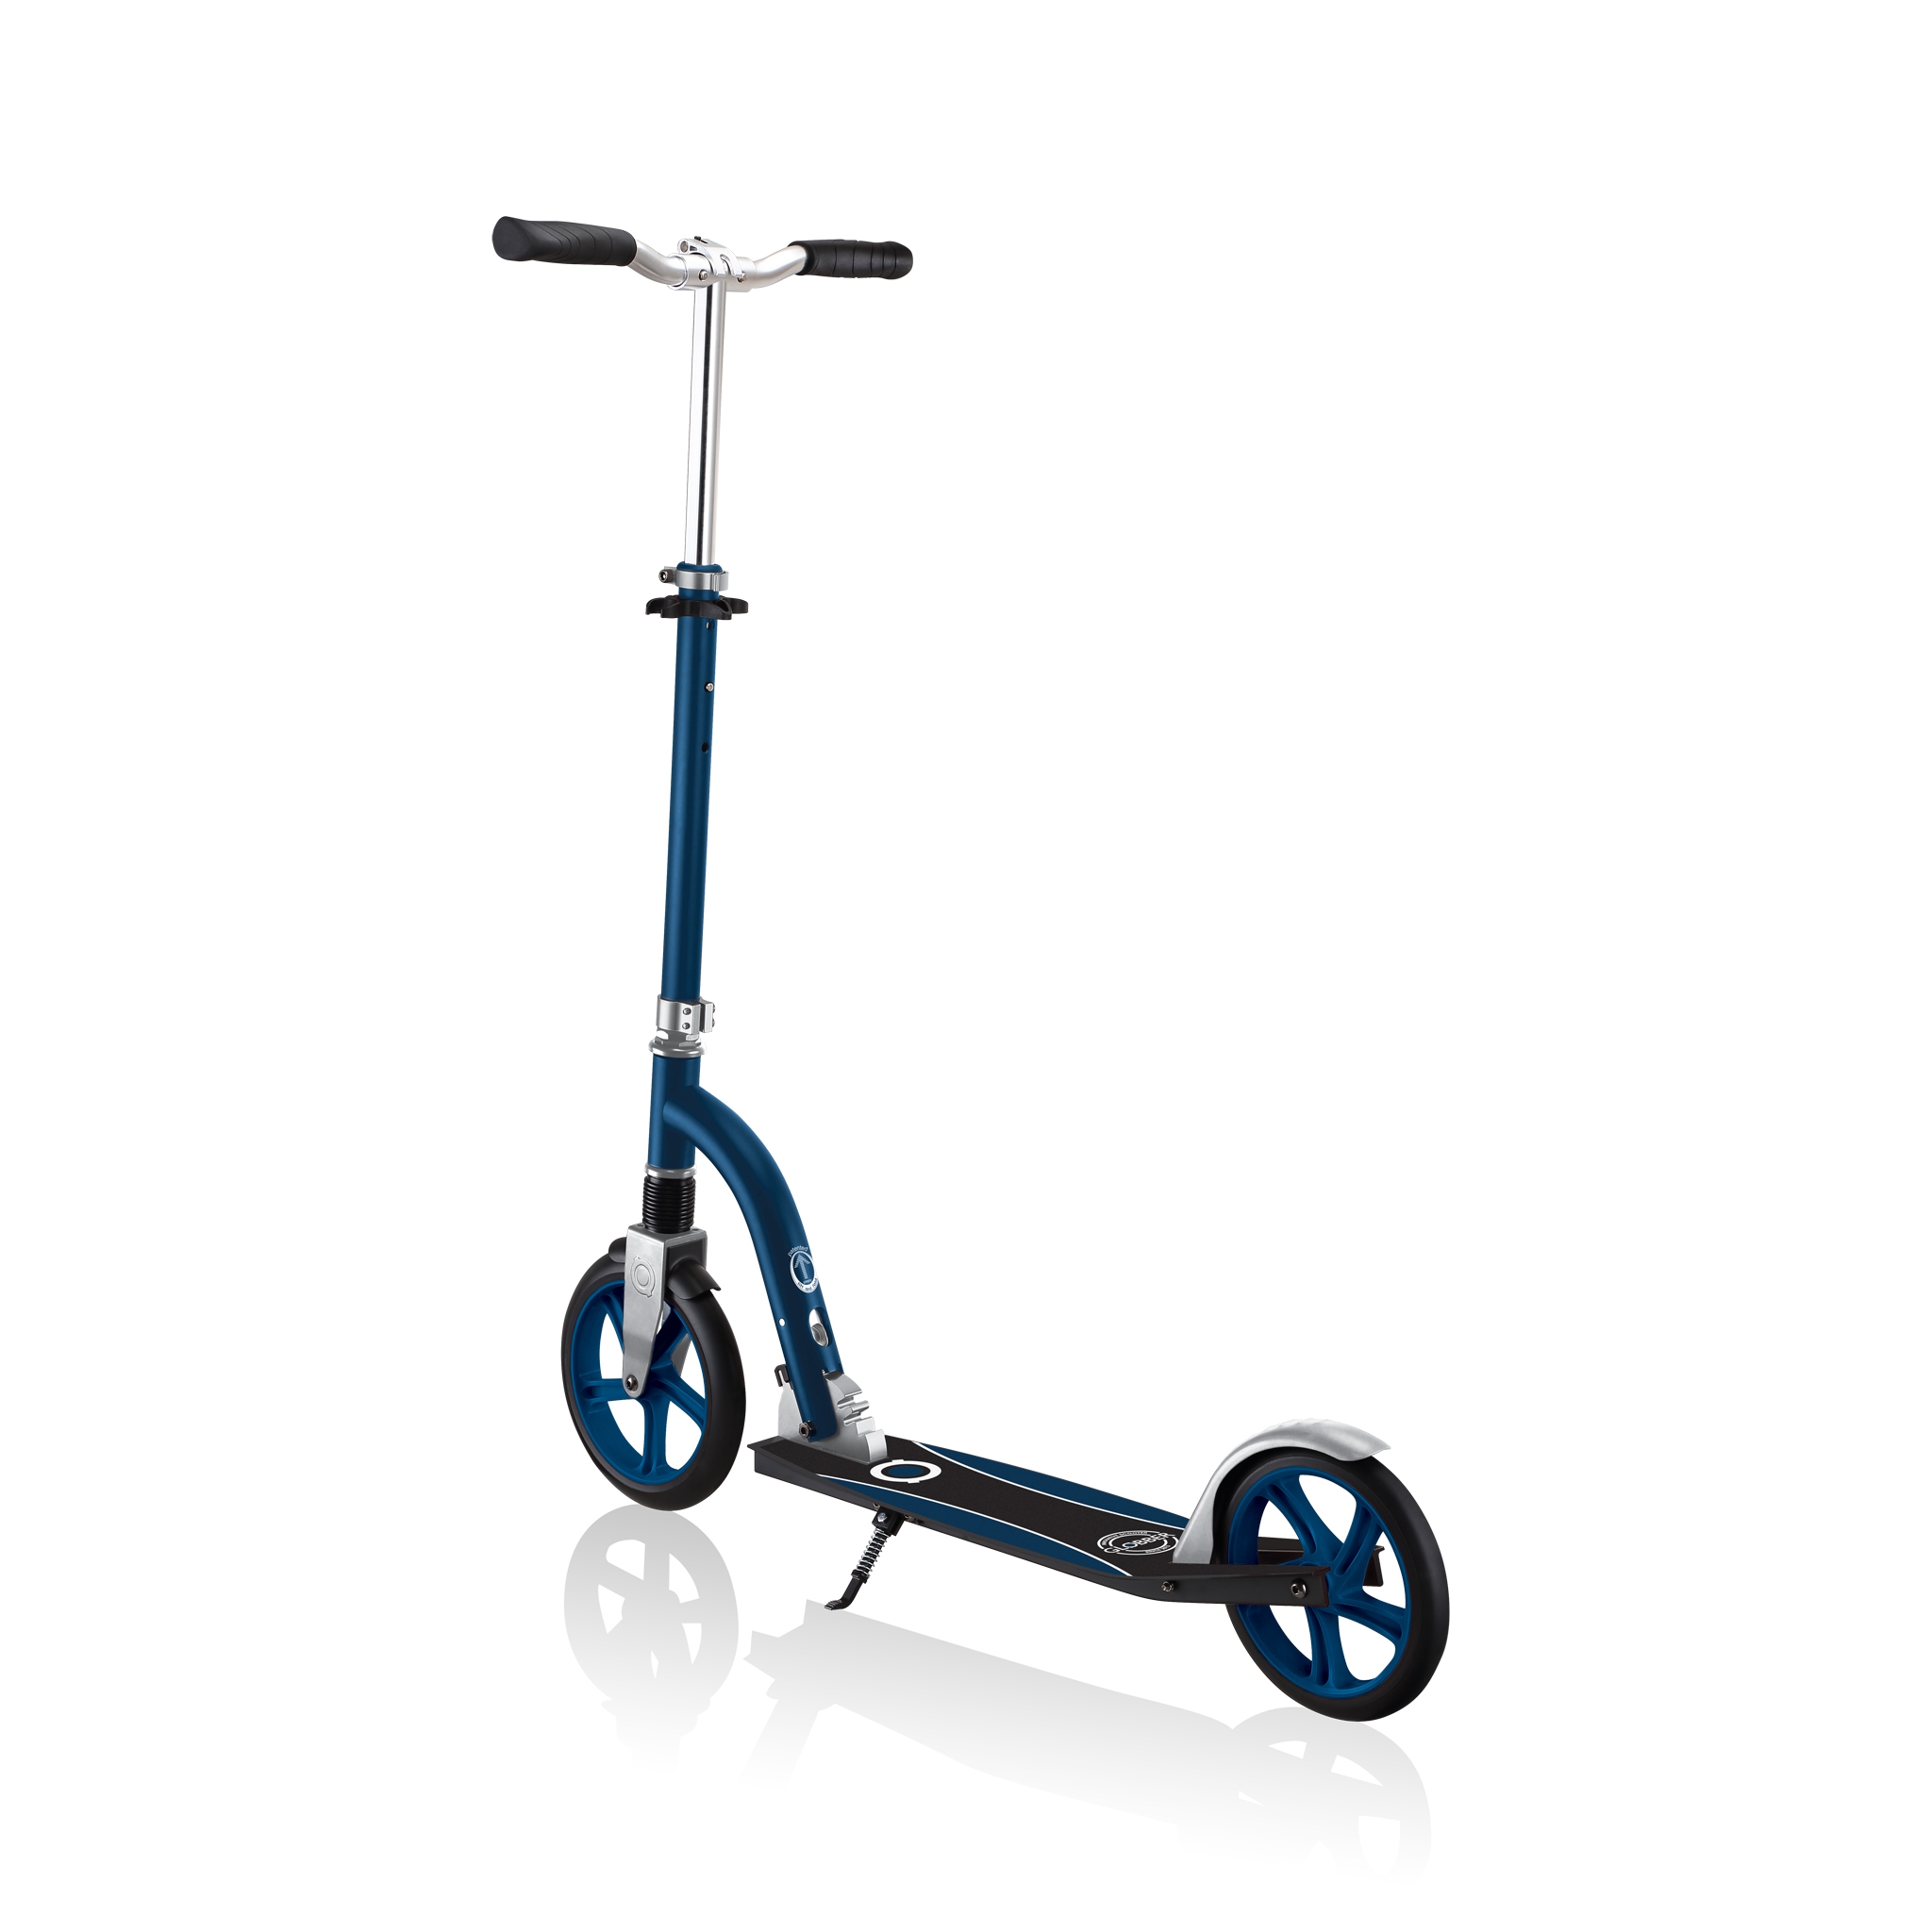 NL-230-205-DUO-big-wheel-scooter-with-front-suspension 8